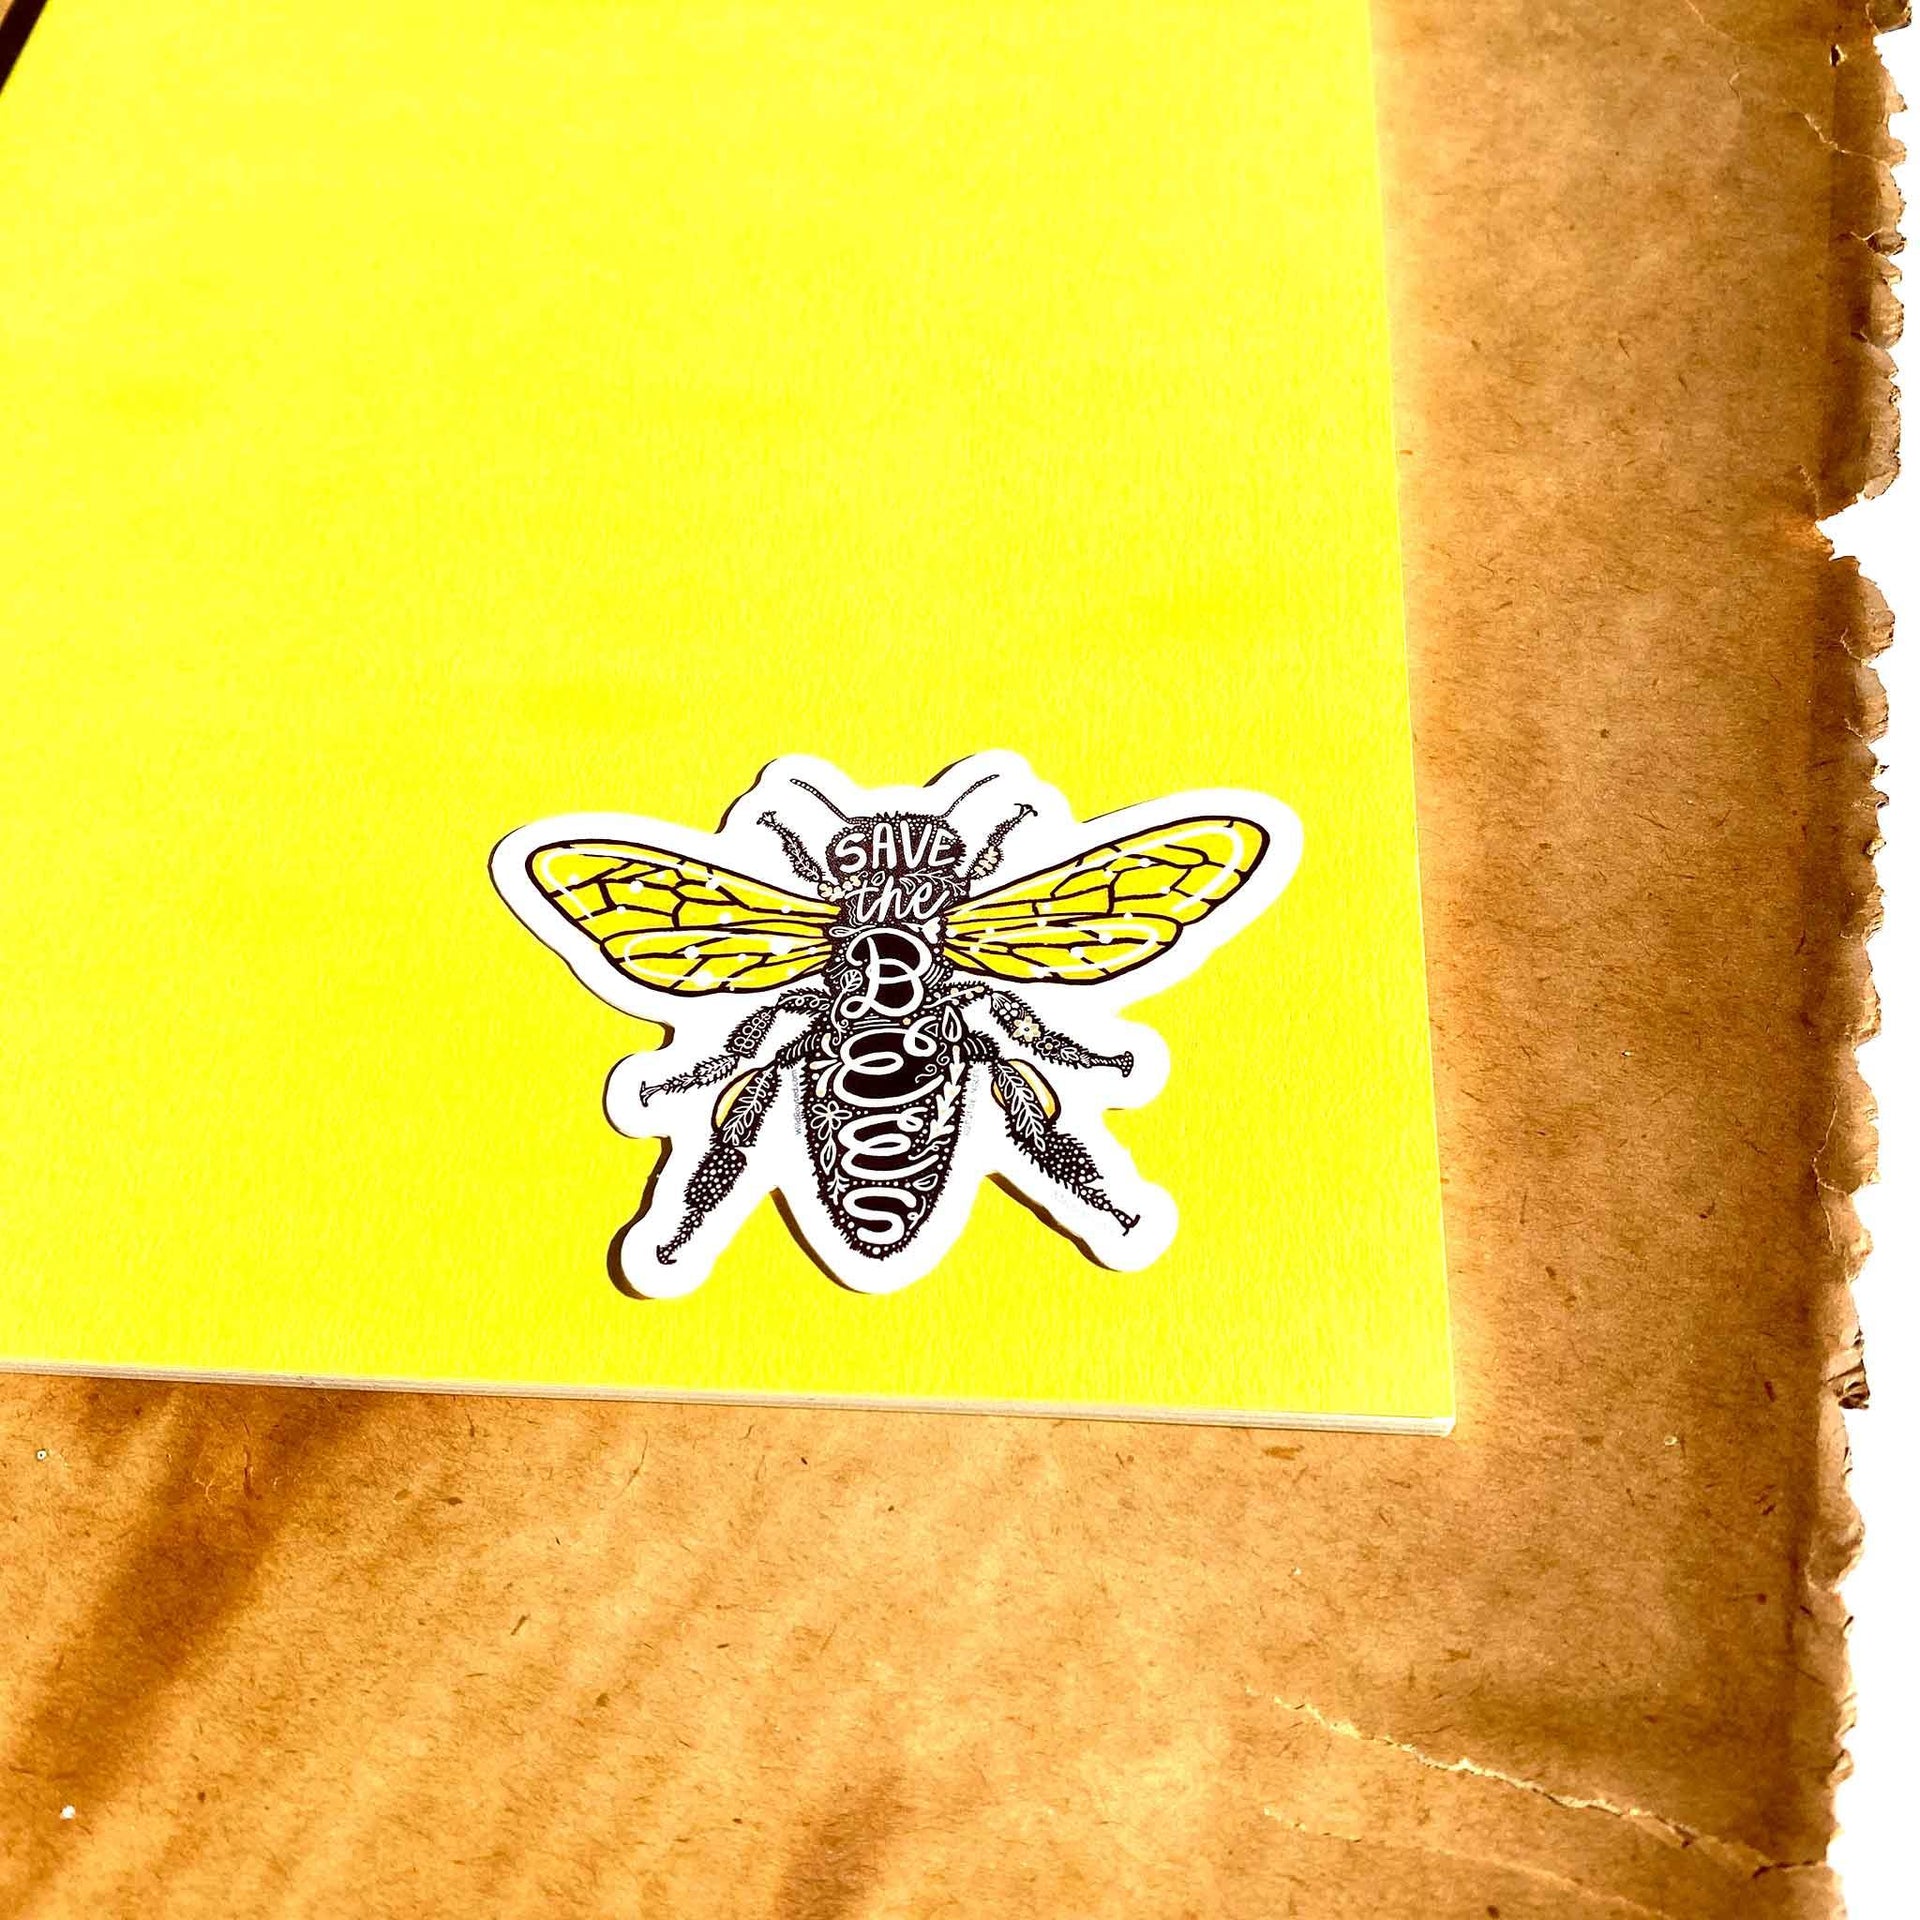 Save the Bees Vinyl Sticker - Wild Routed